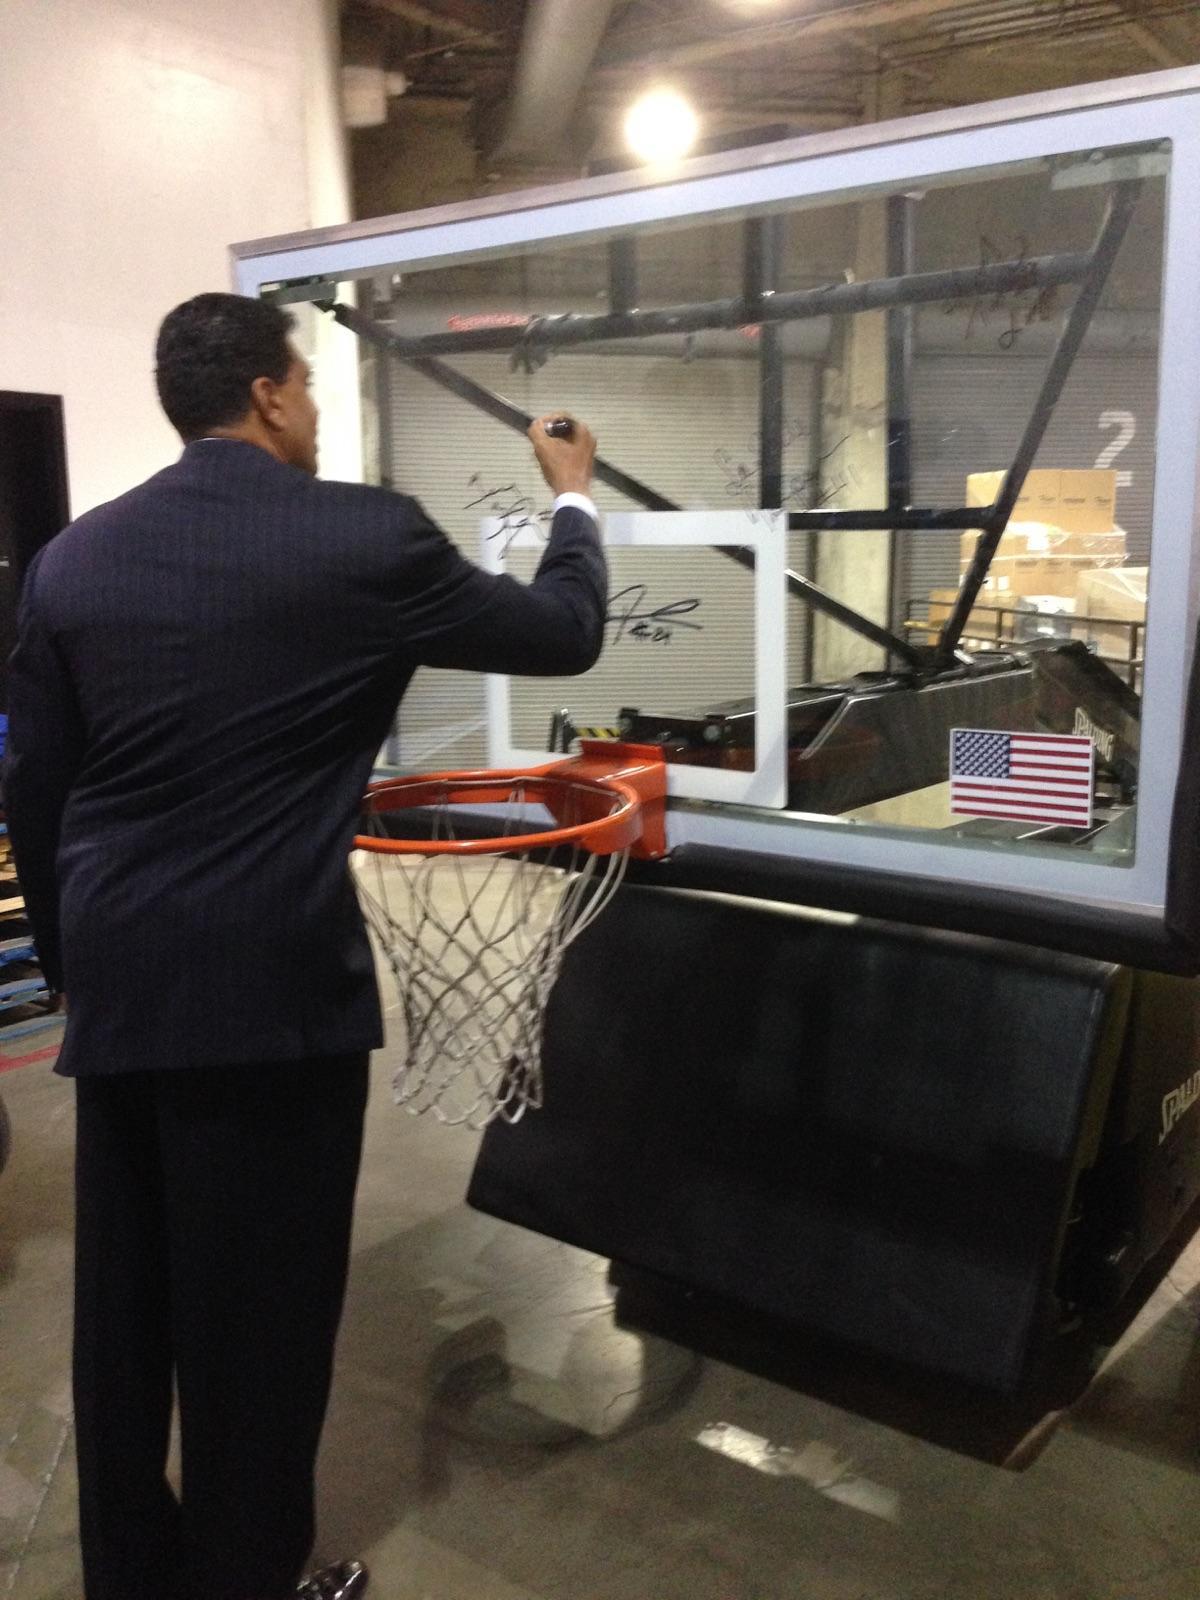 Theus signs backboard.